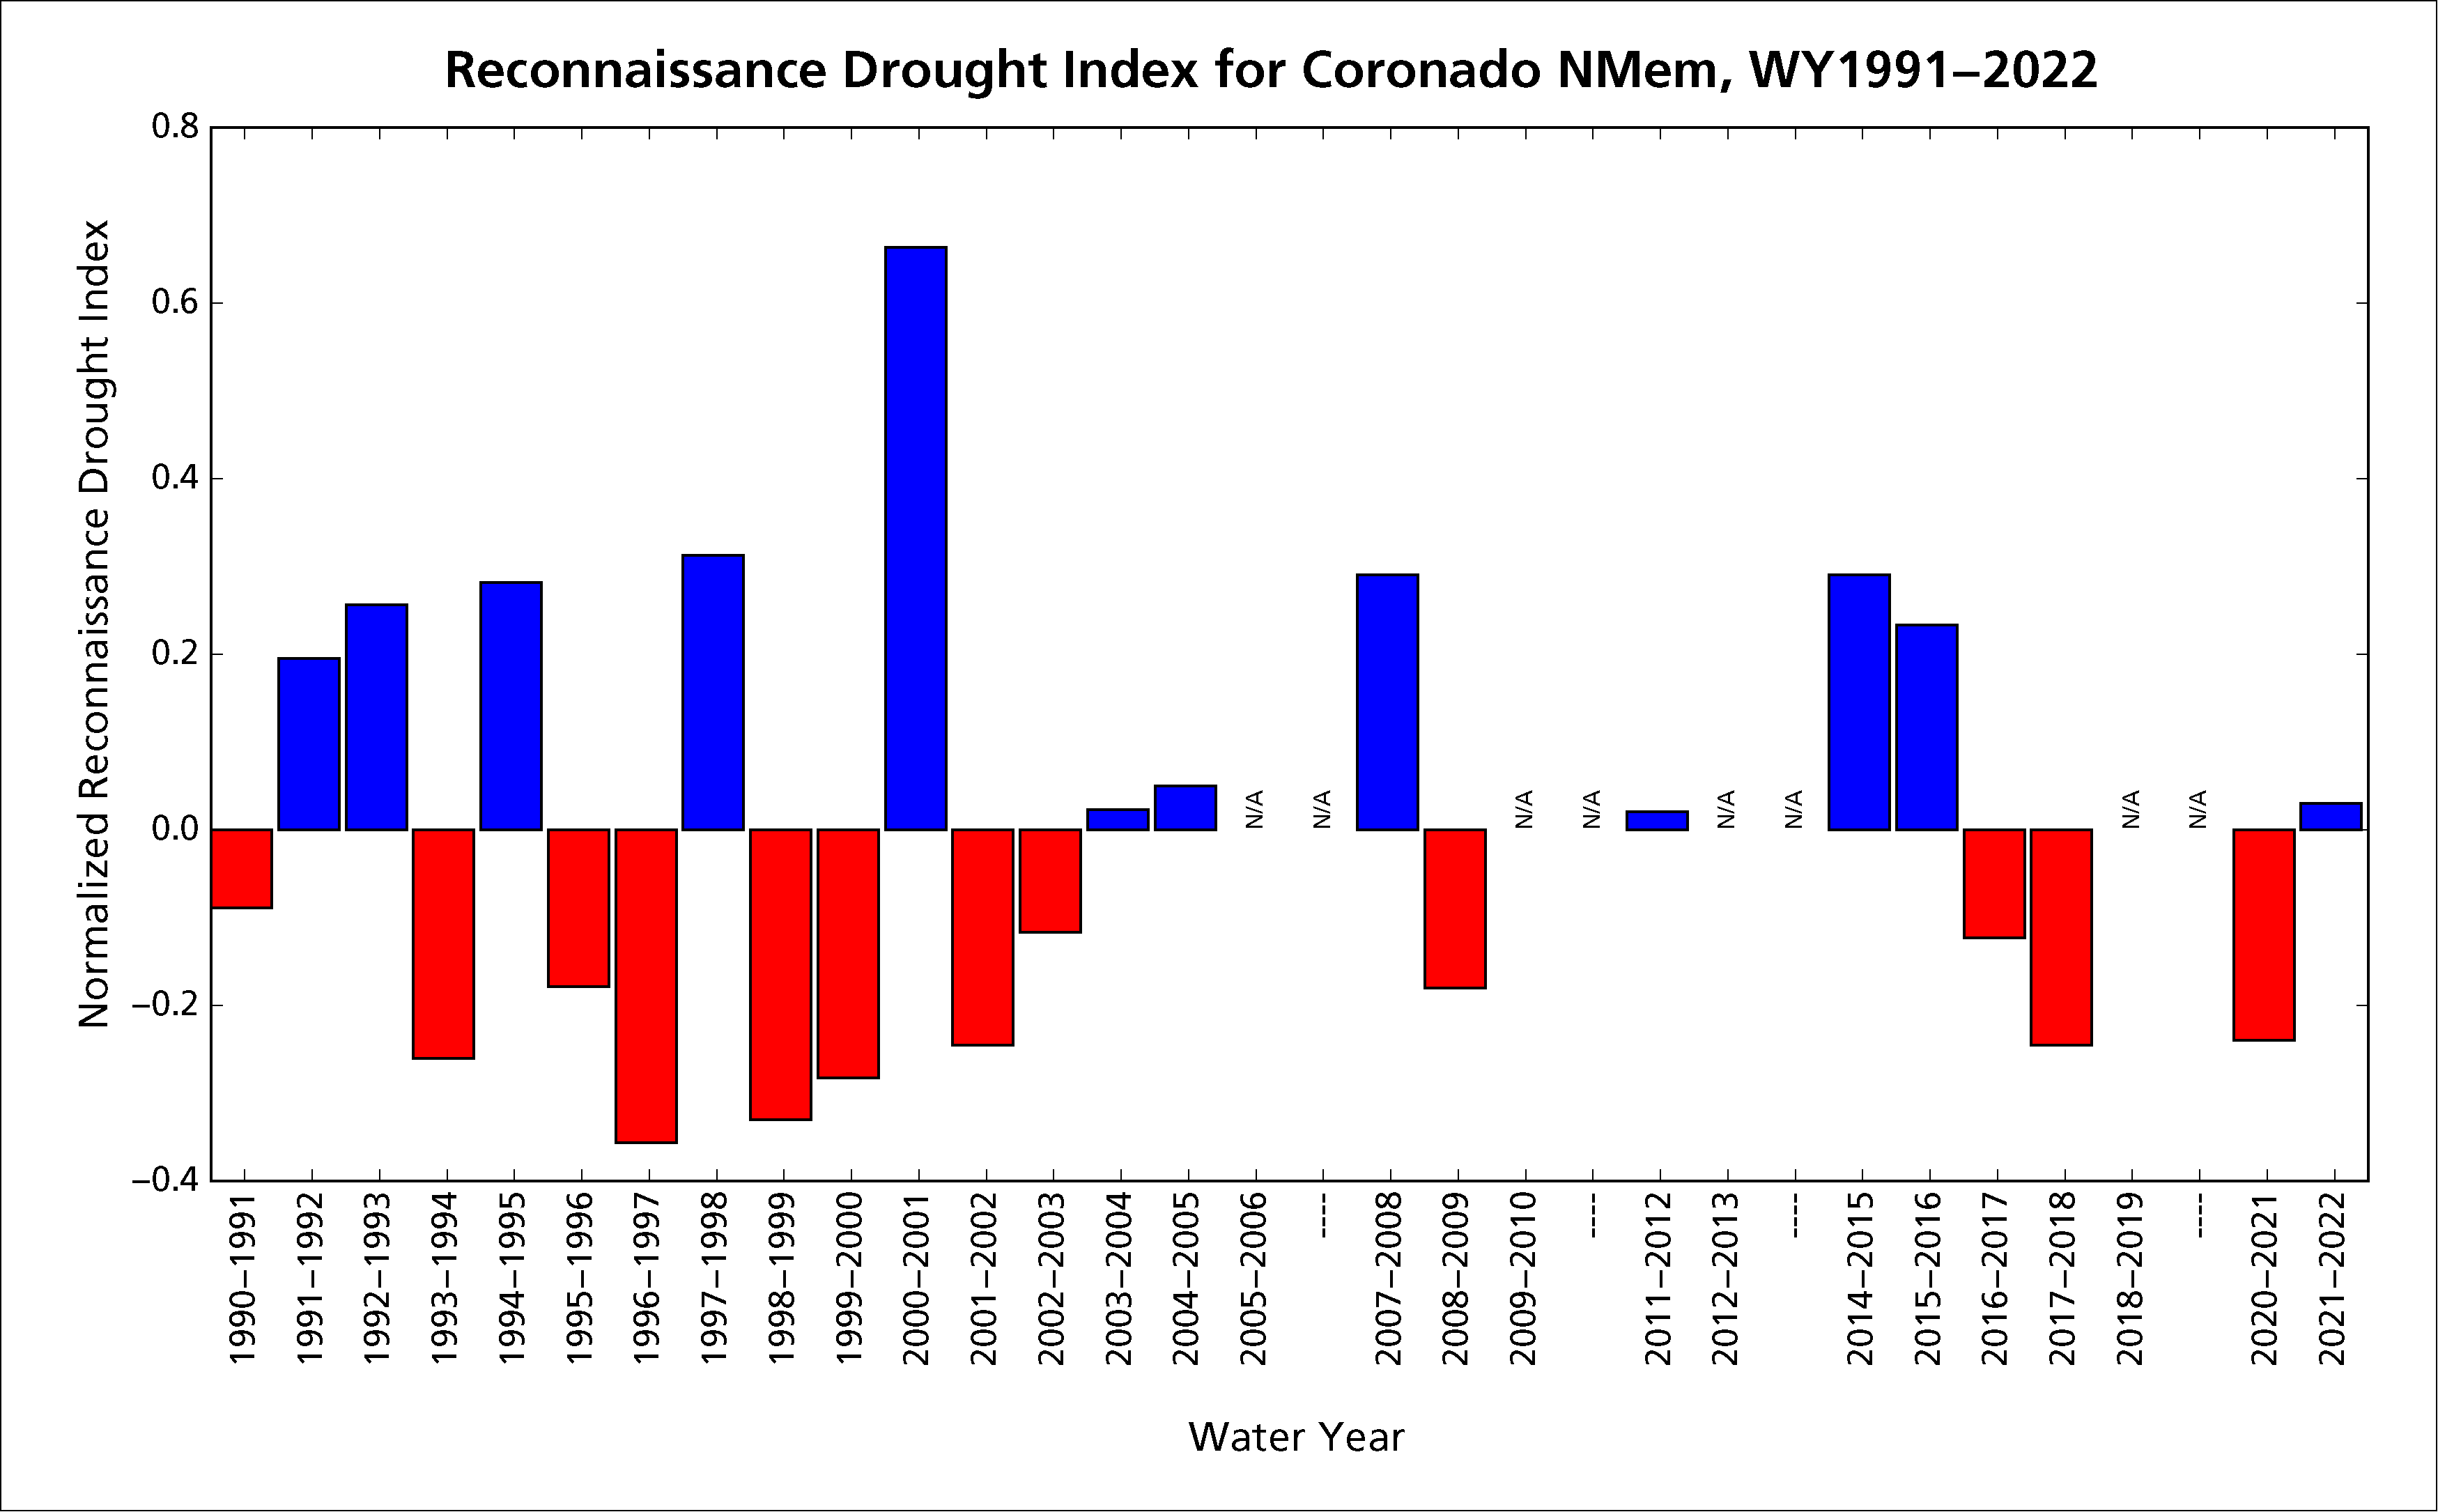 Bar graph showing slightly wetter conditions in water year 2022 than the average for water years 1991-2022.